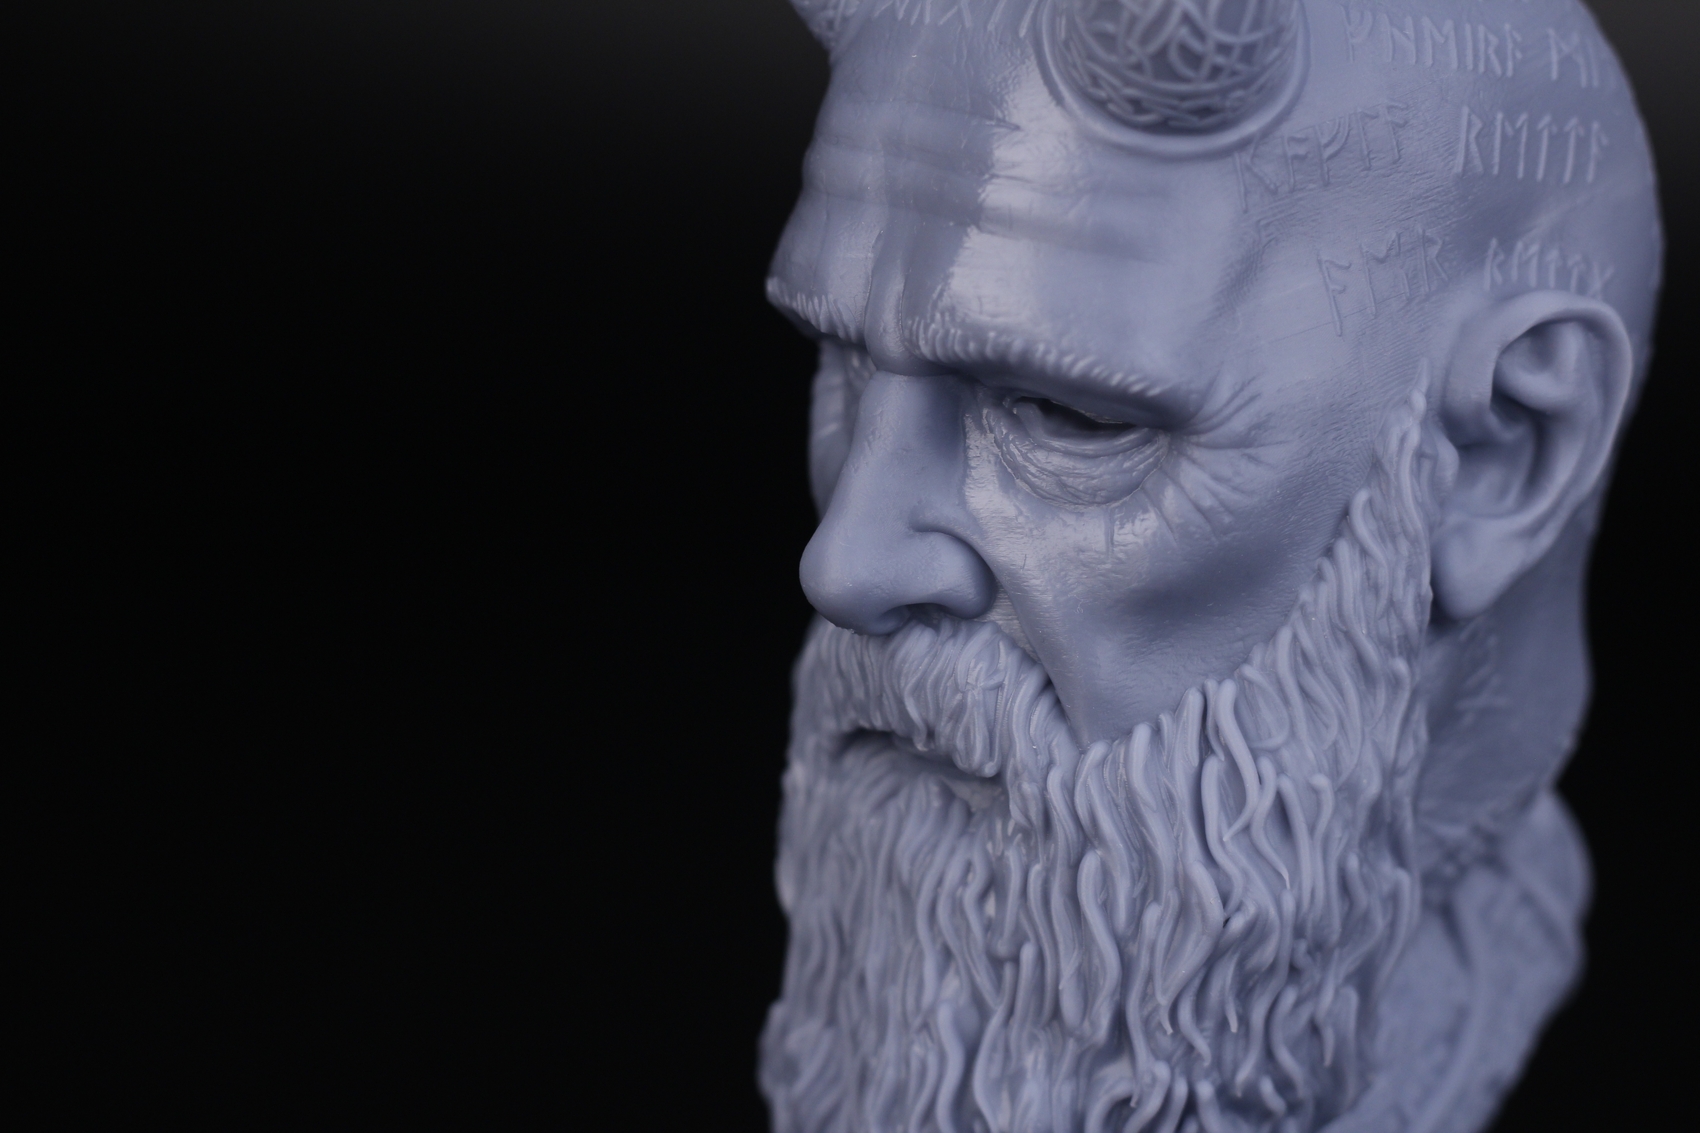 Mimir Bust from Fotis Mint printed on Anycubic Photon M38 | Anycubic Photon M3 Review: Bridging the gap